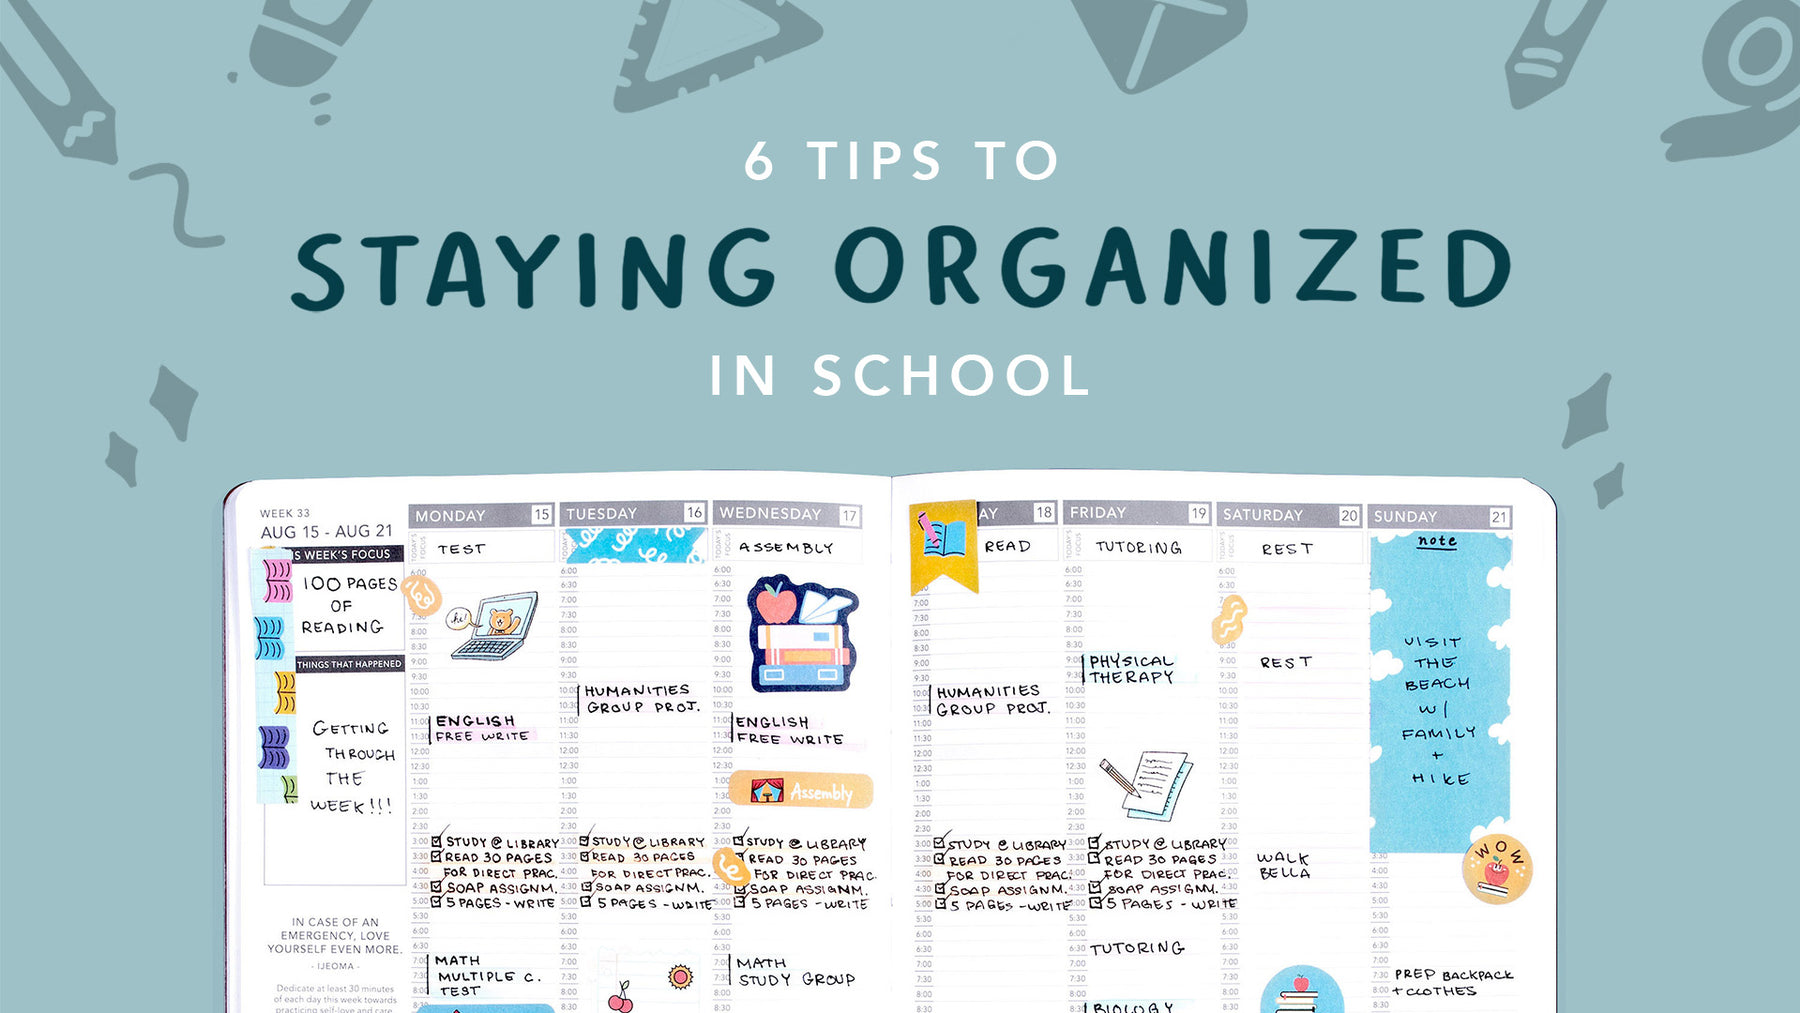 6 Tips for Staying Organized in School